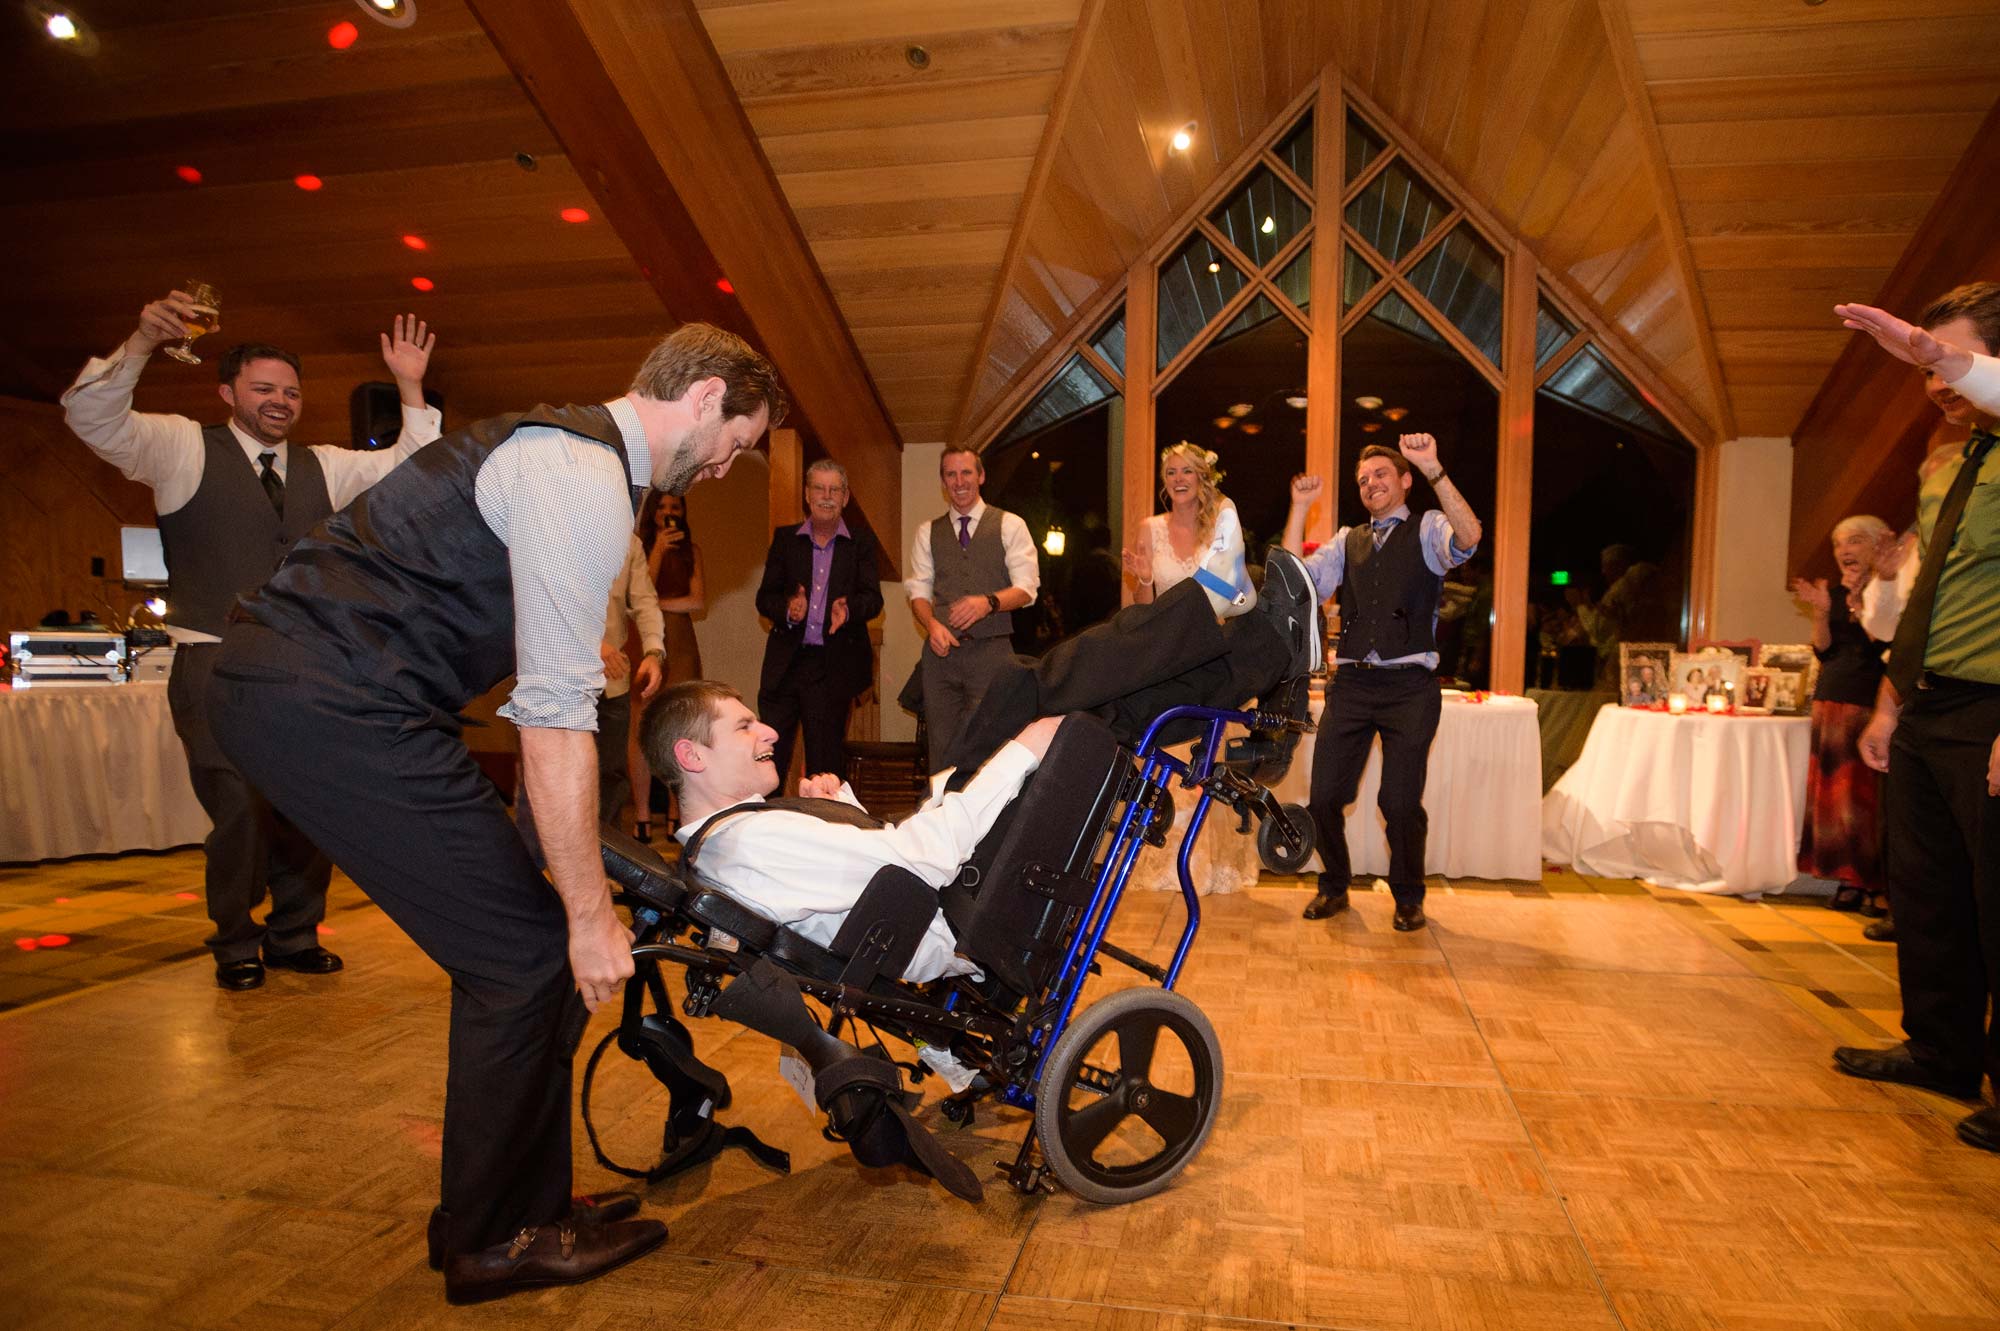 Groomsment dancing with brides brother in a wheelchair at Lake Tahoe Edgewood wedding. Lake Tahoe wedding photography by Photography by Monique in Reno, Nevada.